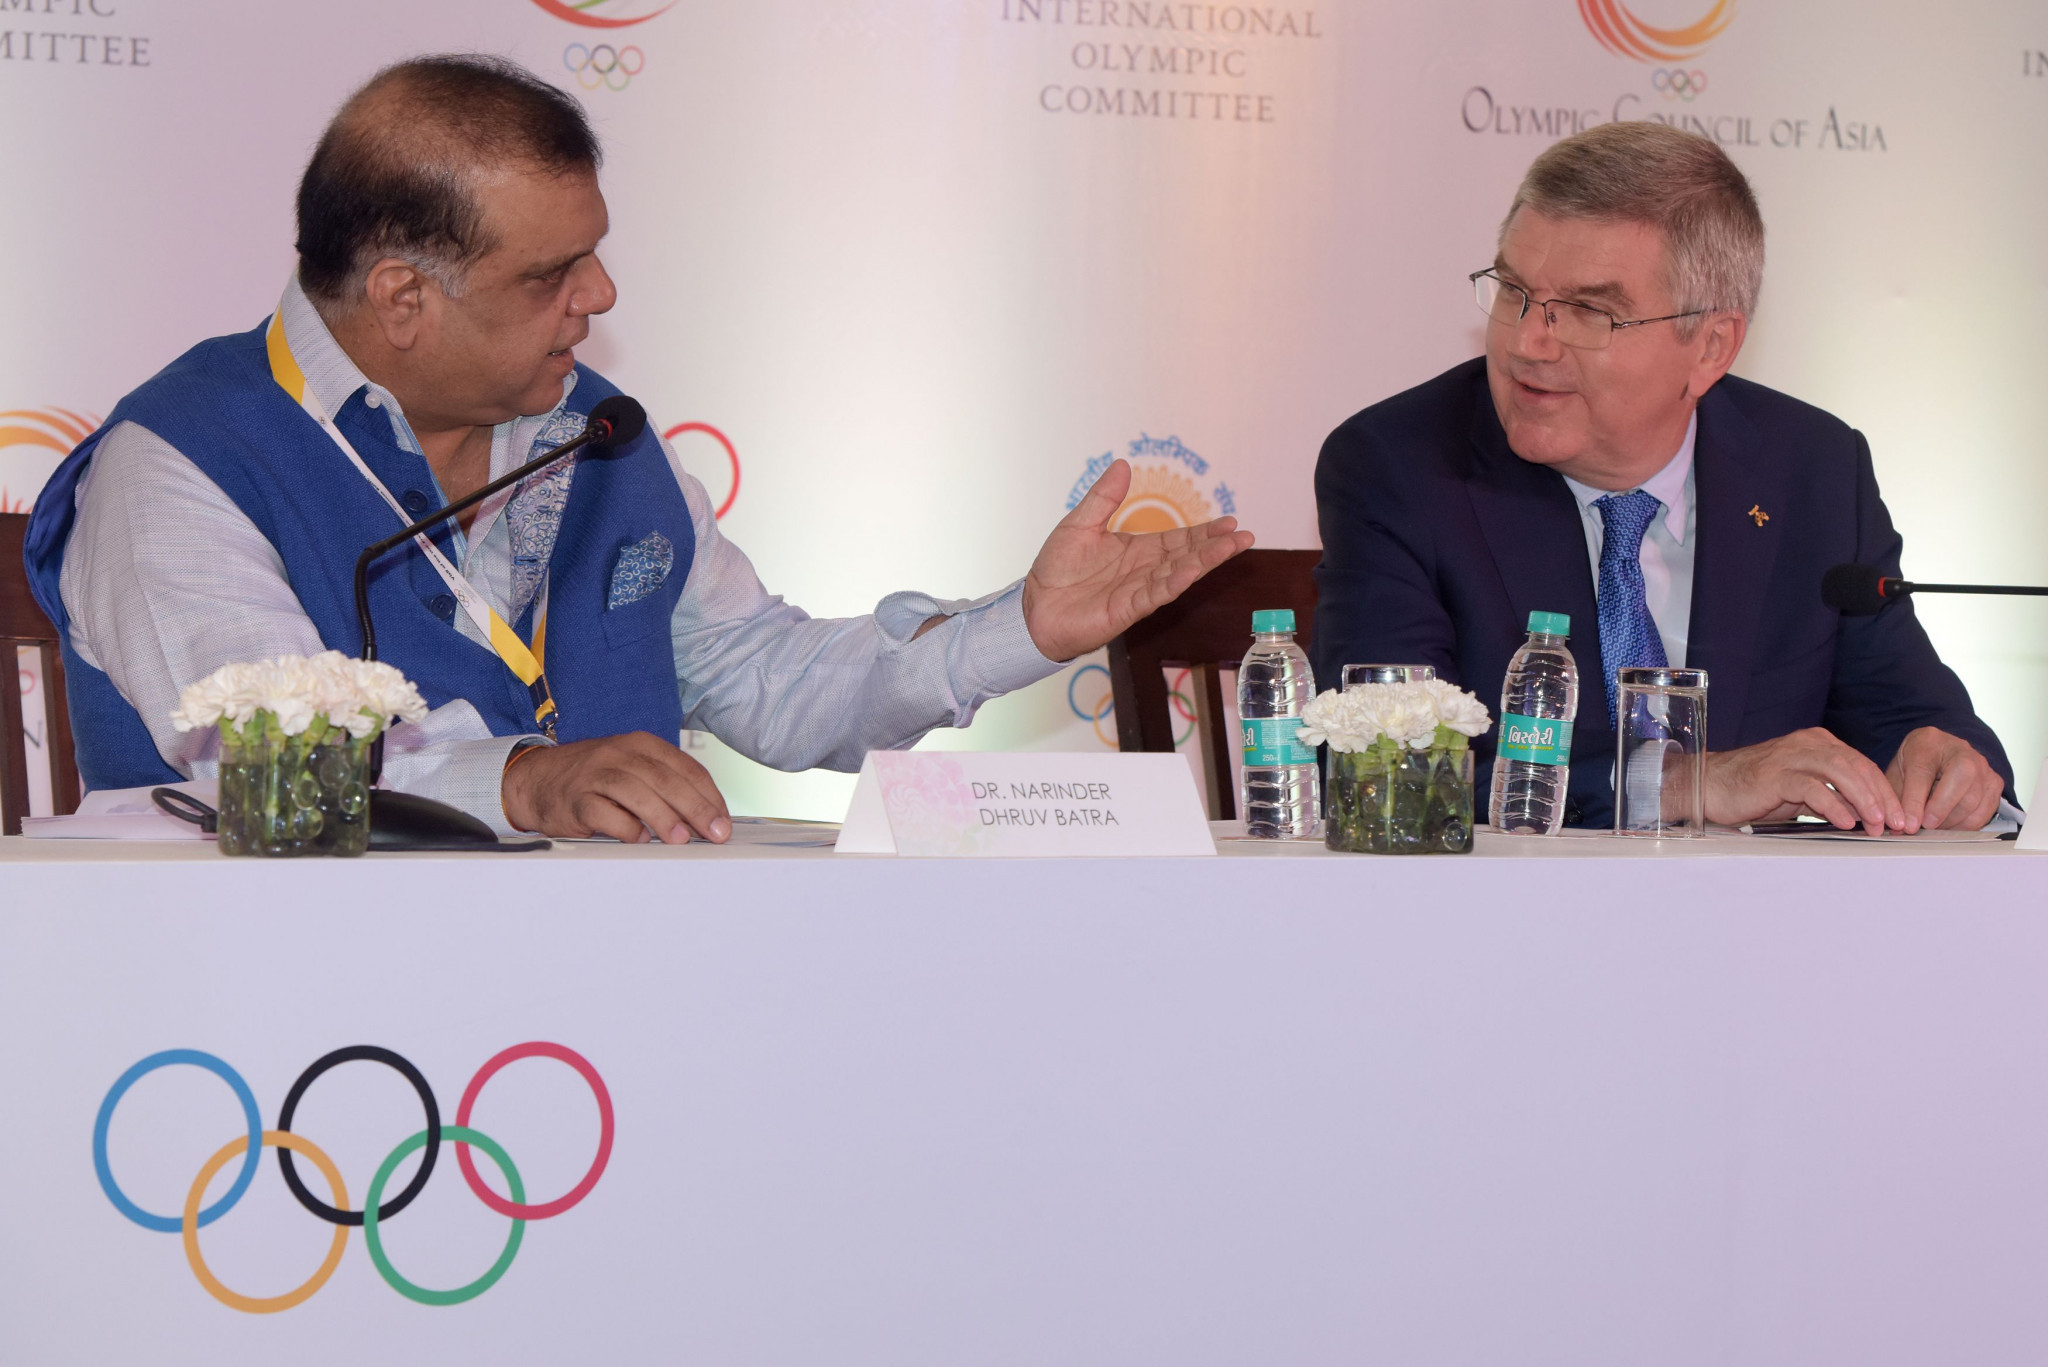 The IOA President became a member of the IOC earlier this year ©Getty Images